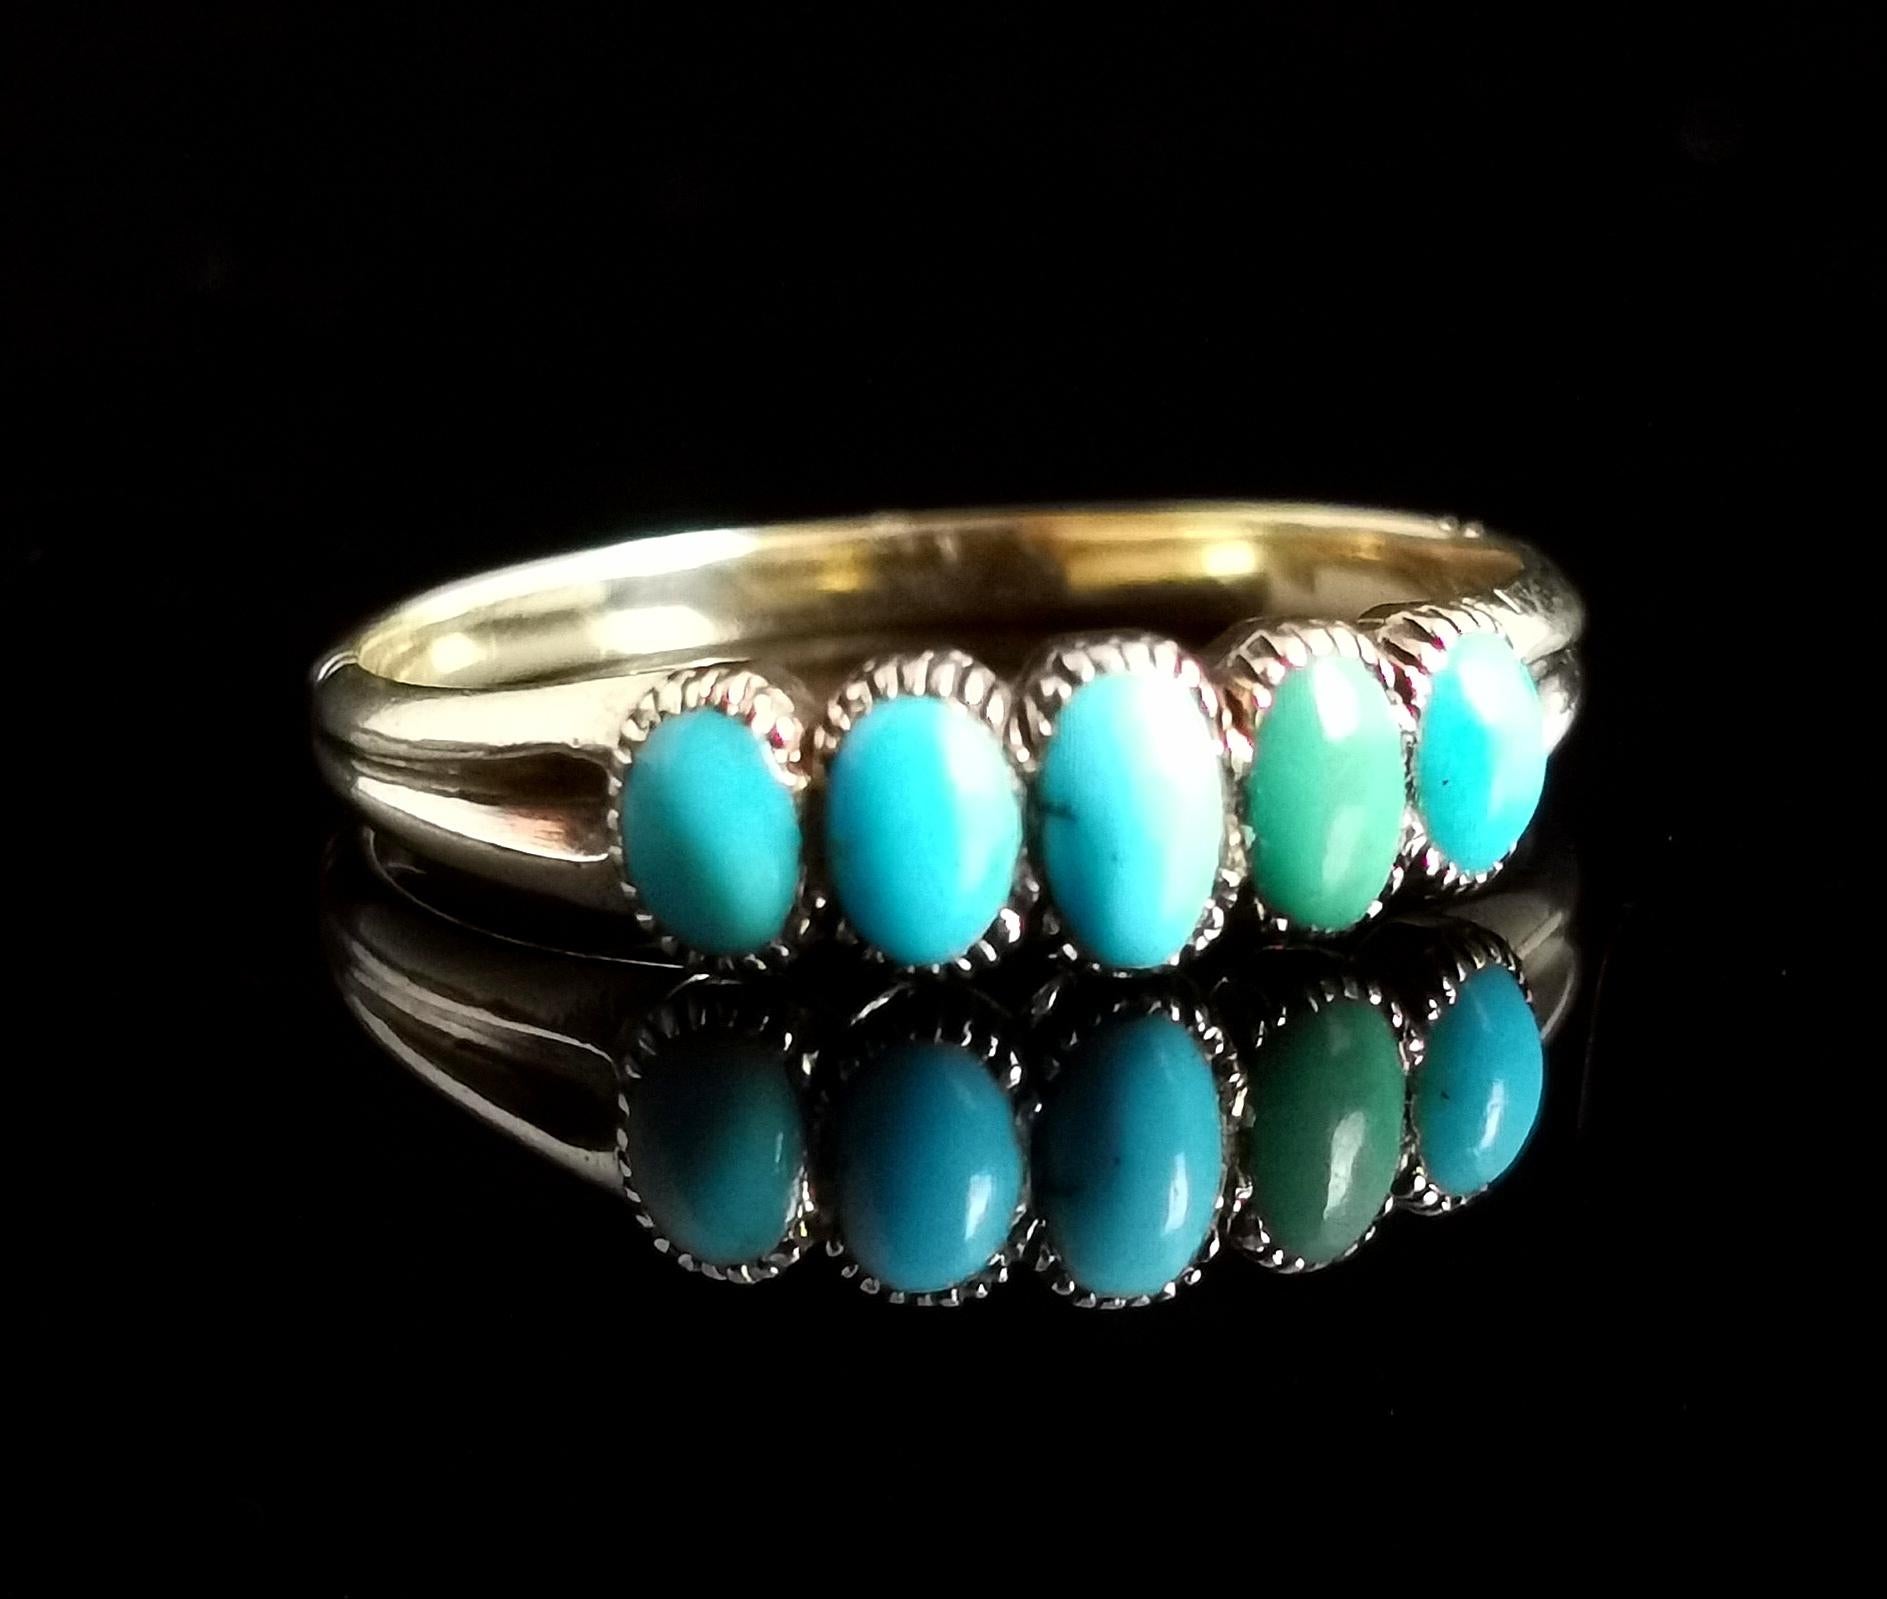 A pretty antique, early Victorian era turquoise five stone ring.

The face of the ring features five beautiful turquoise in an array of greens, graduating smaller from the largest centre stone.

It has decorative shoulders leading on to a slender